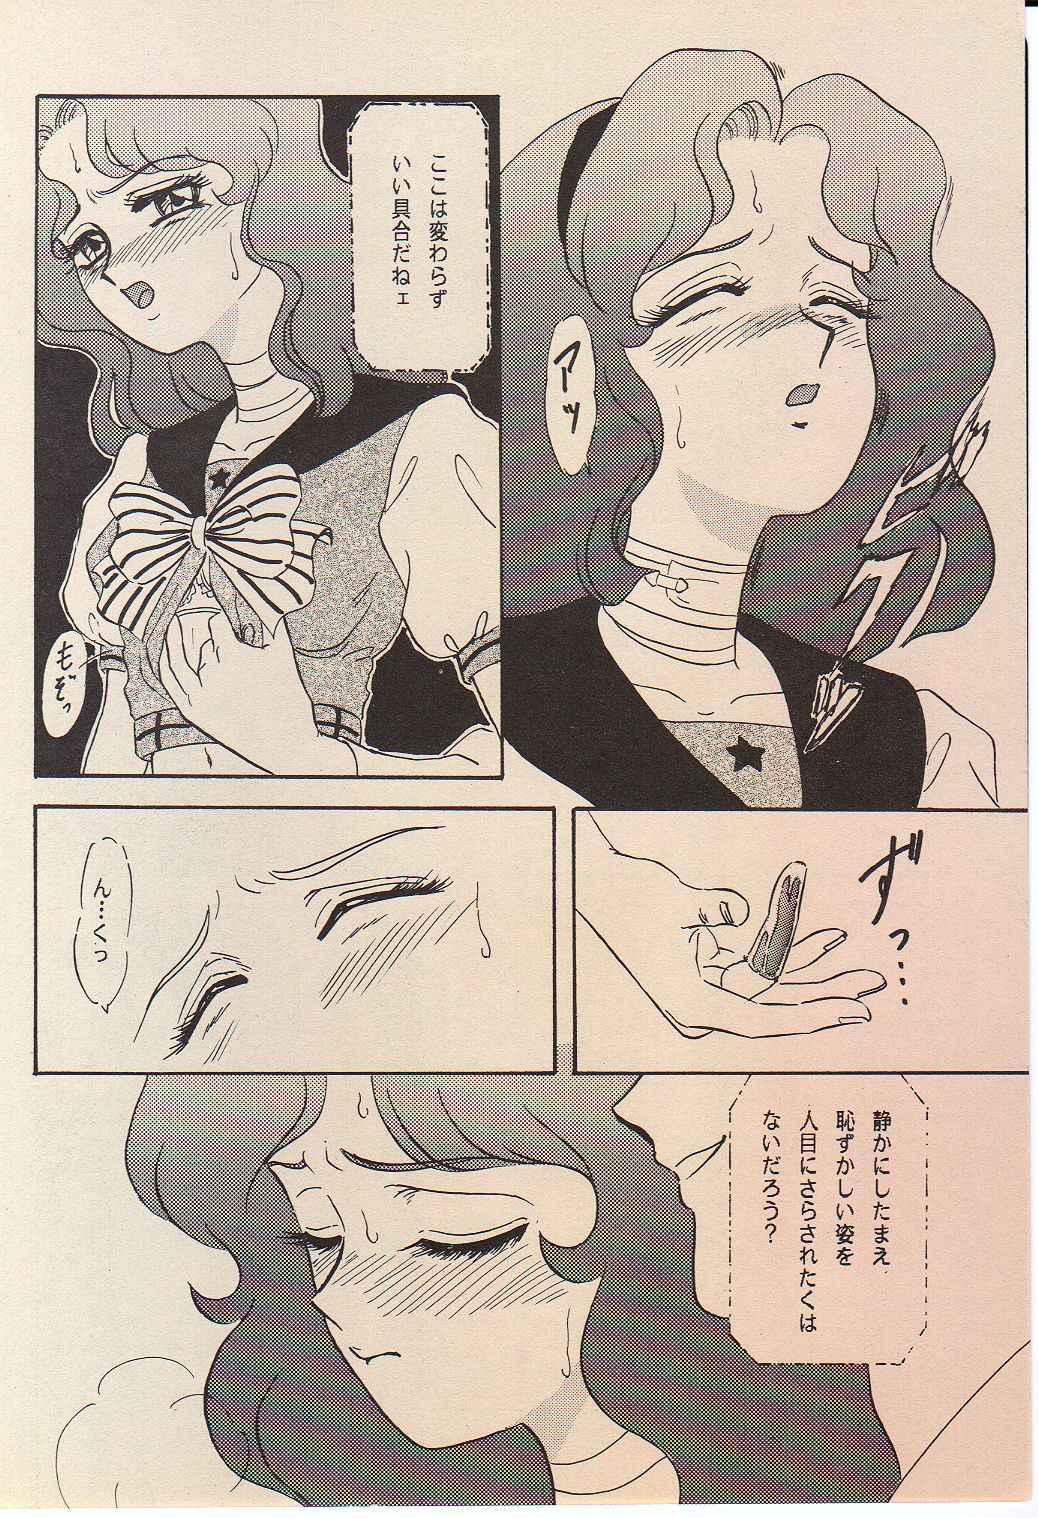 Sexteen Lunch Box 11 - Twinkle Twinkle - Sailor moon Adult - Page 11